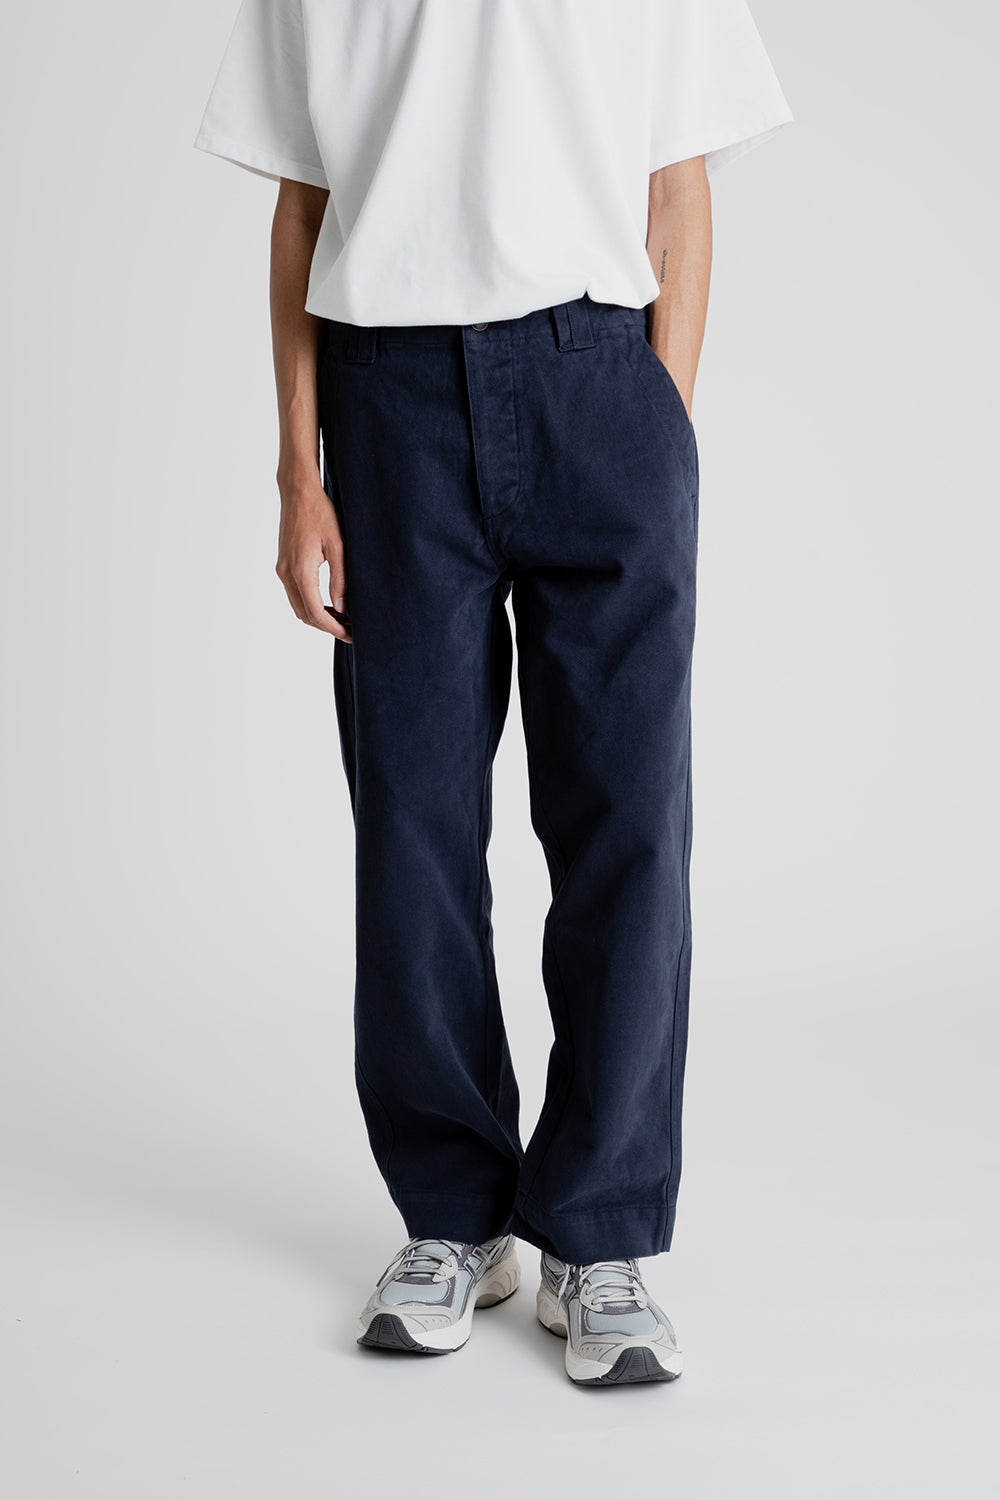 Parages Dad Pants in Navy